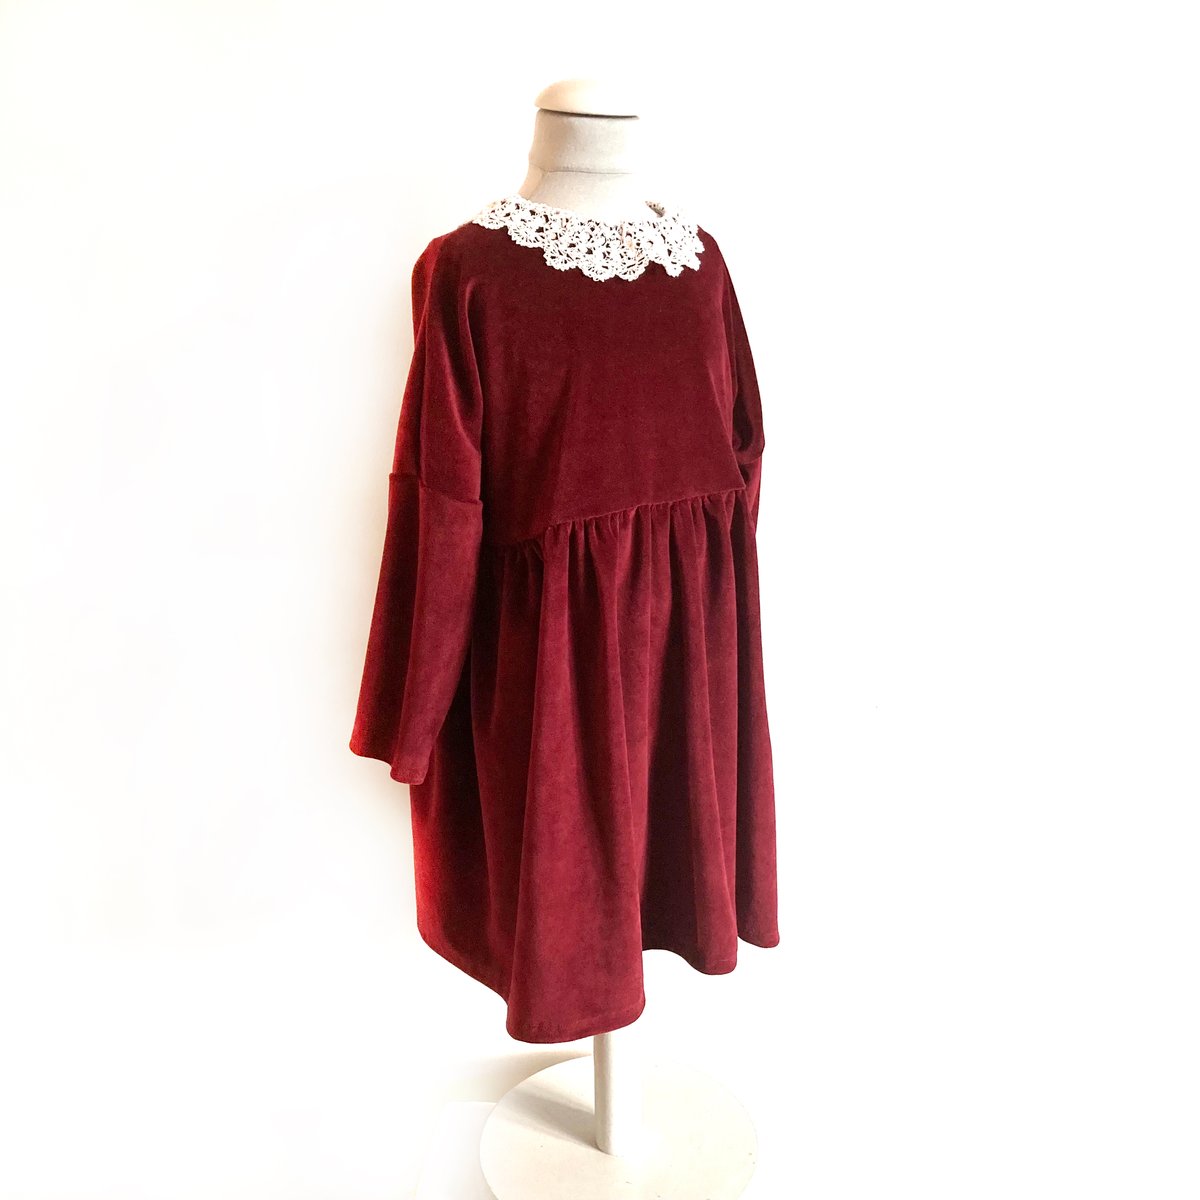 Rosa Dress -red velvet with lace collar